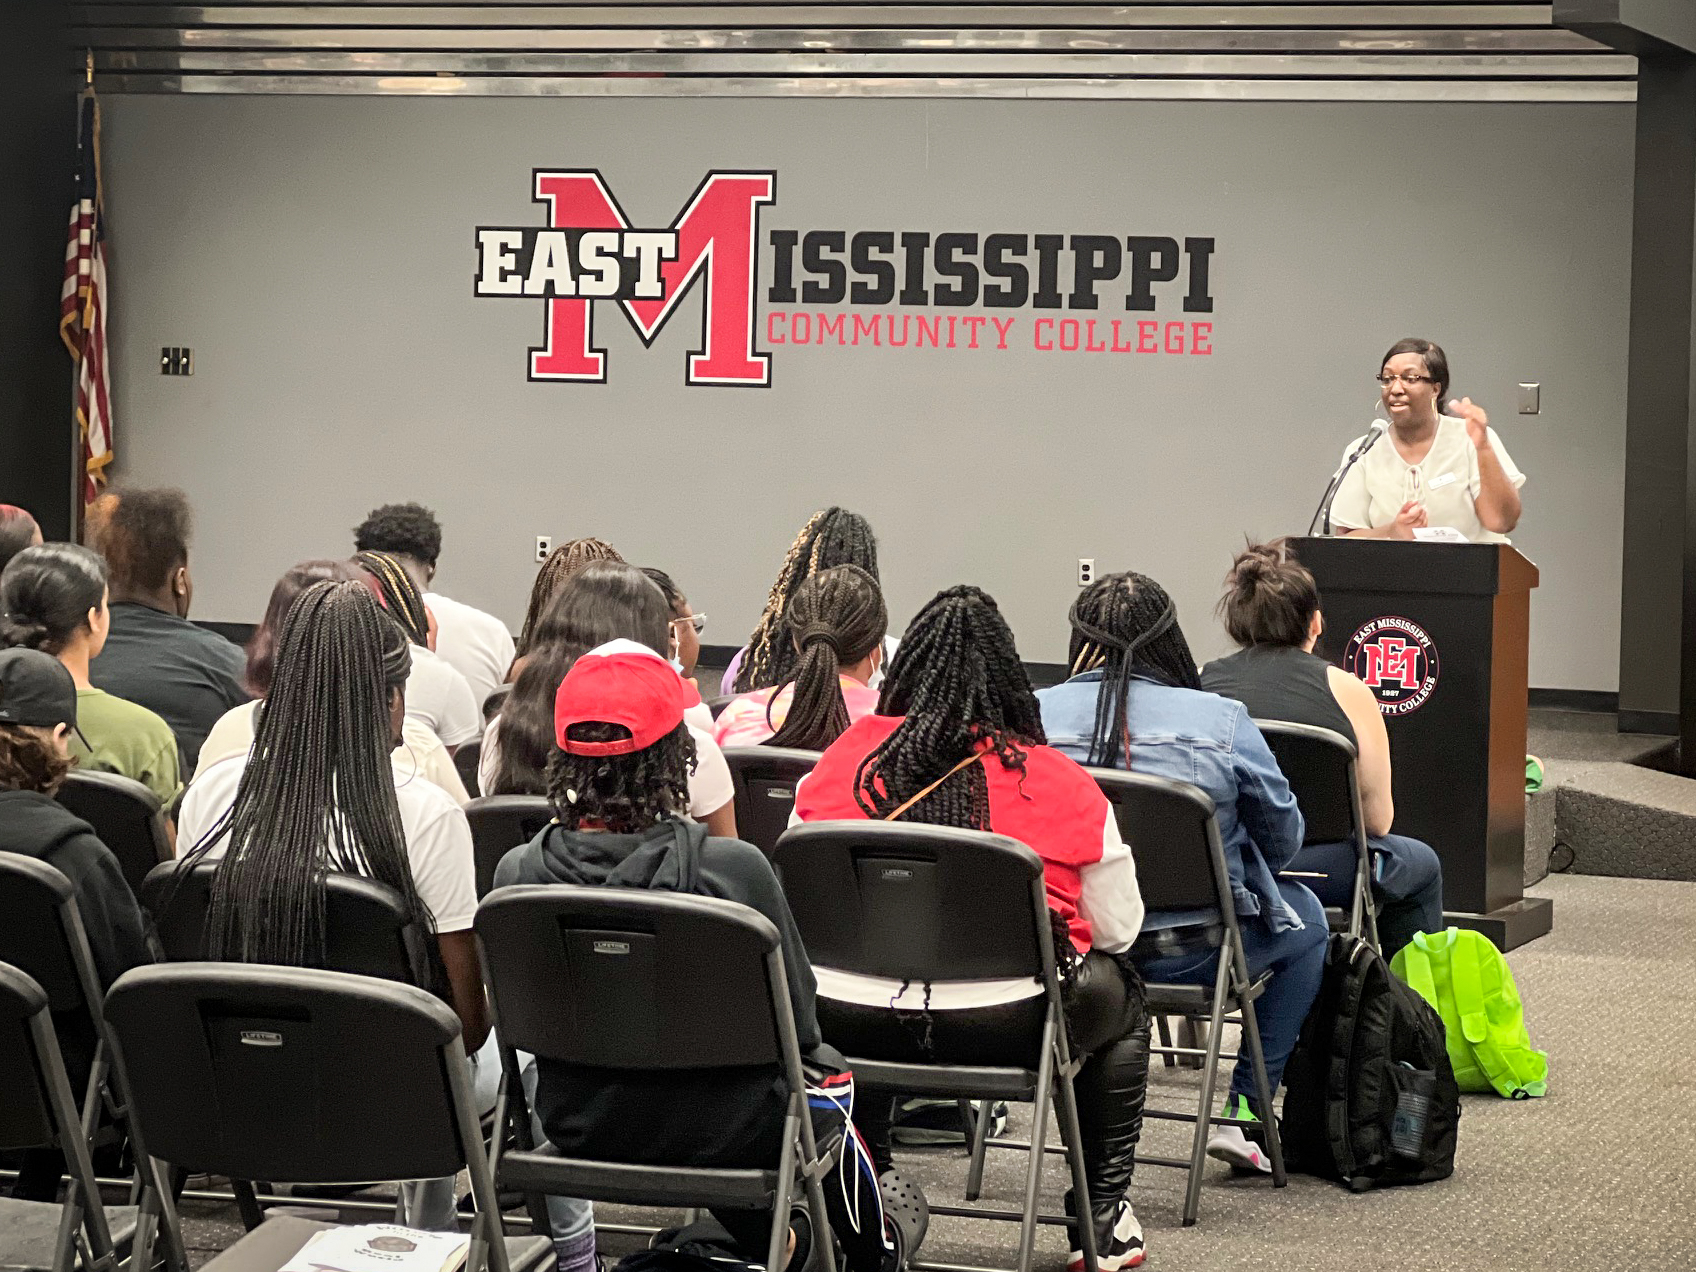 A teacher standing behind a podium at East Mississippi Community College, teaching to a room full of students.